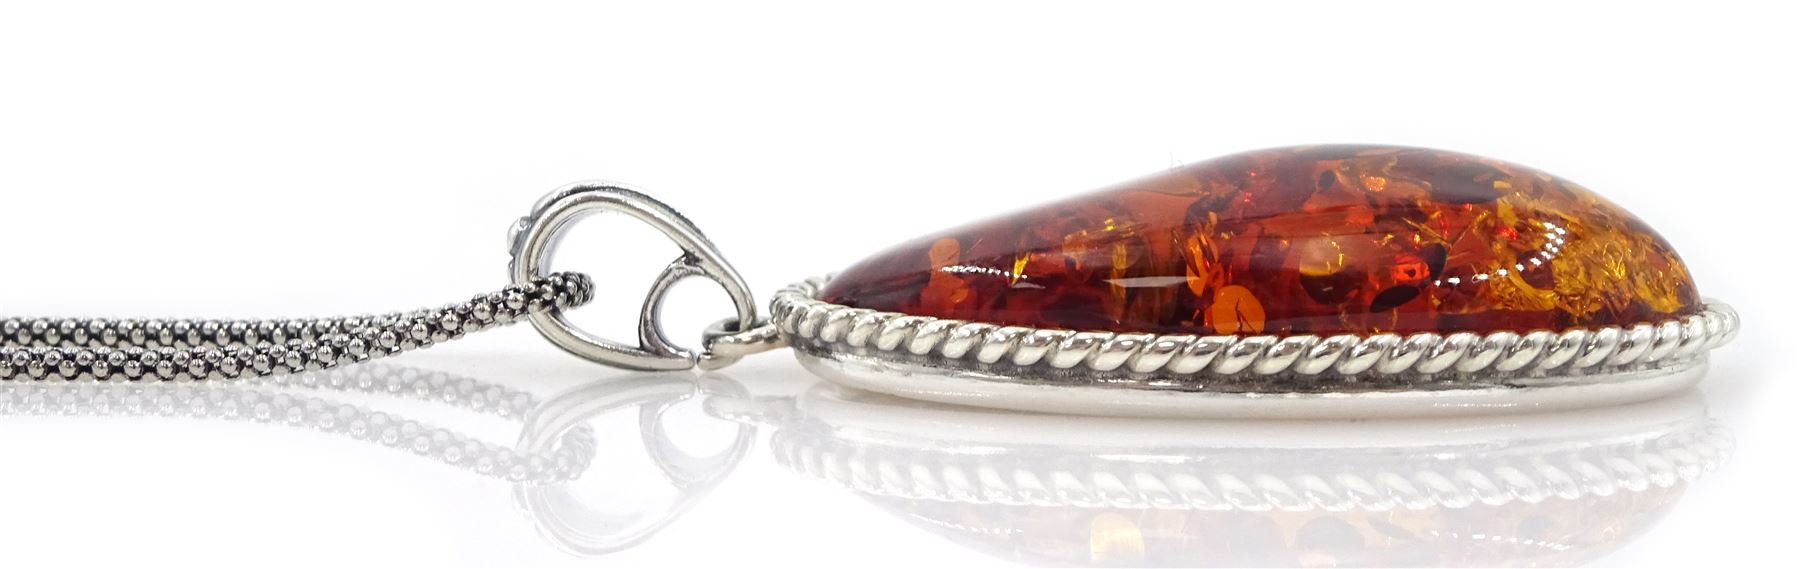 Silver Baltic amber oval pendant necklace - Image 2 of 2